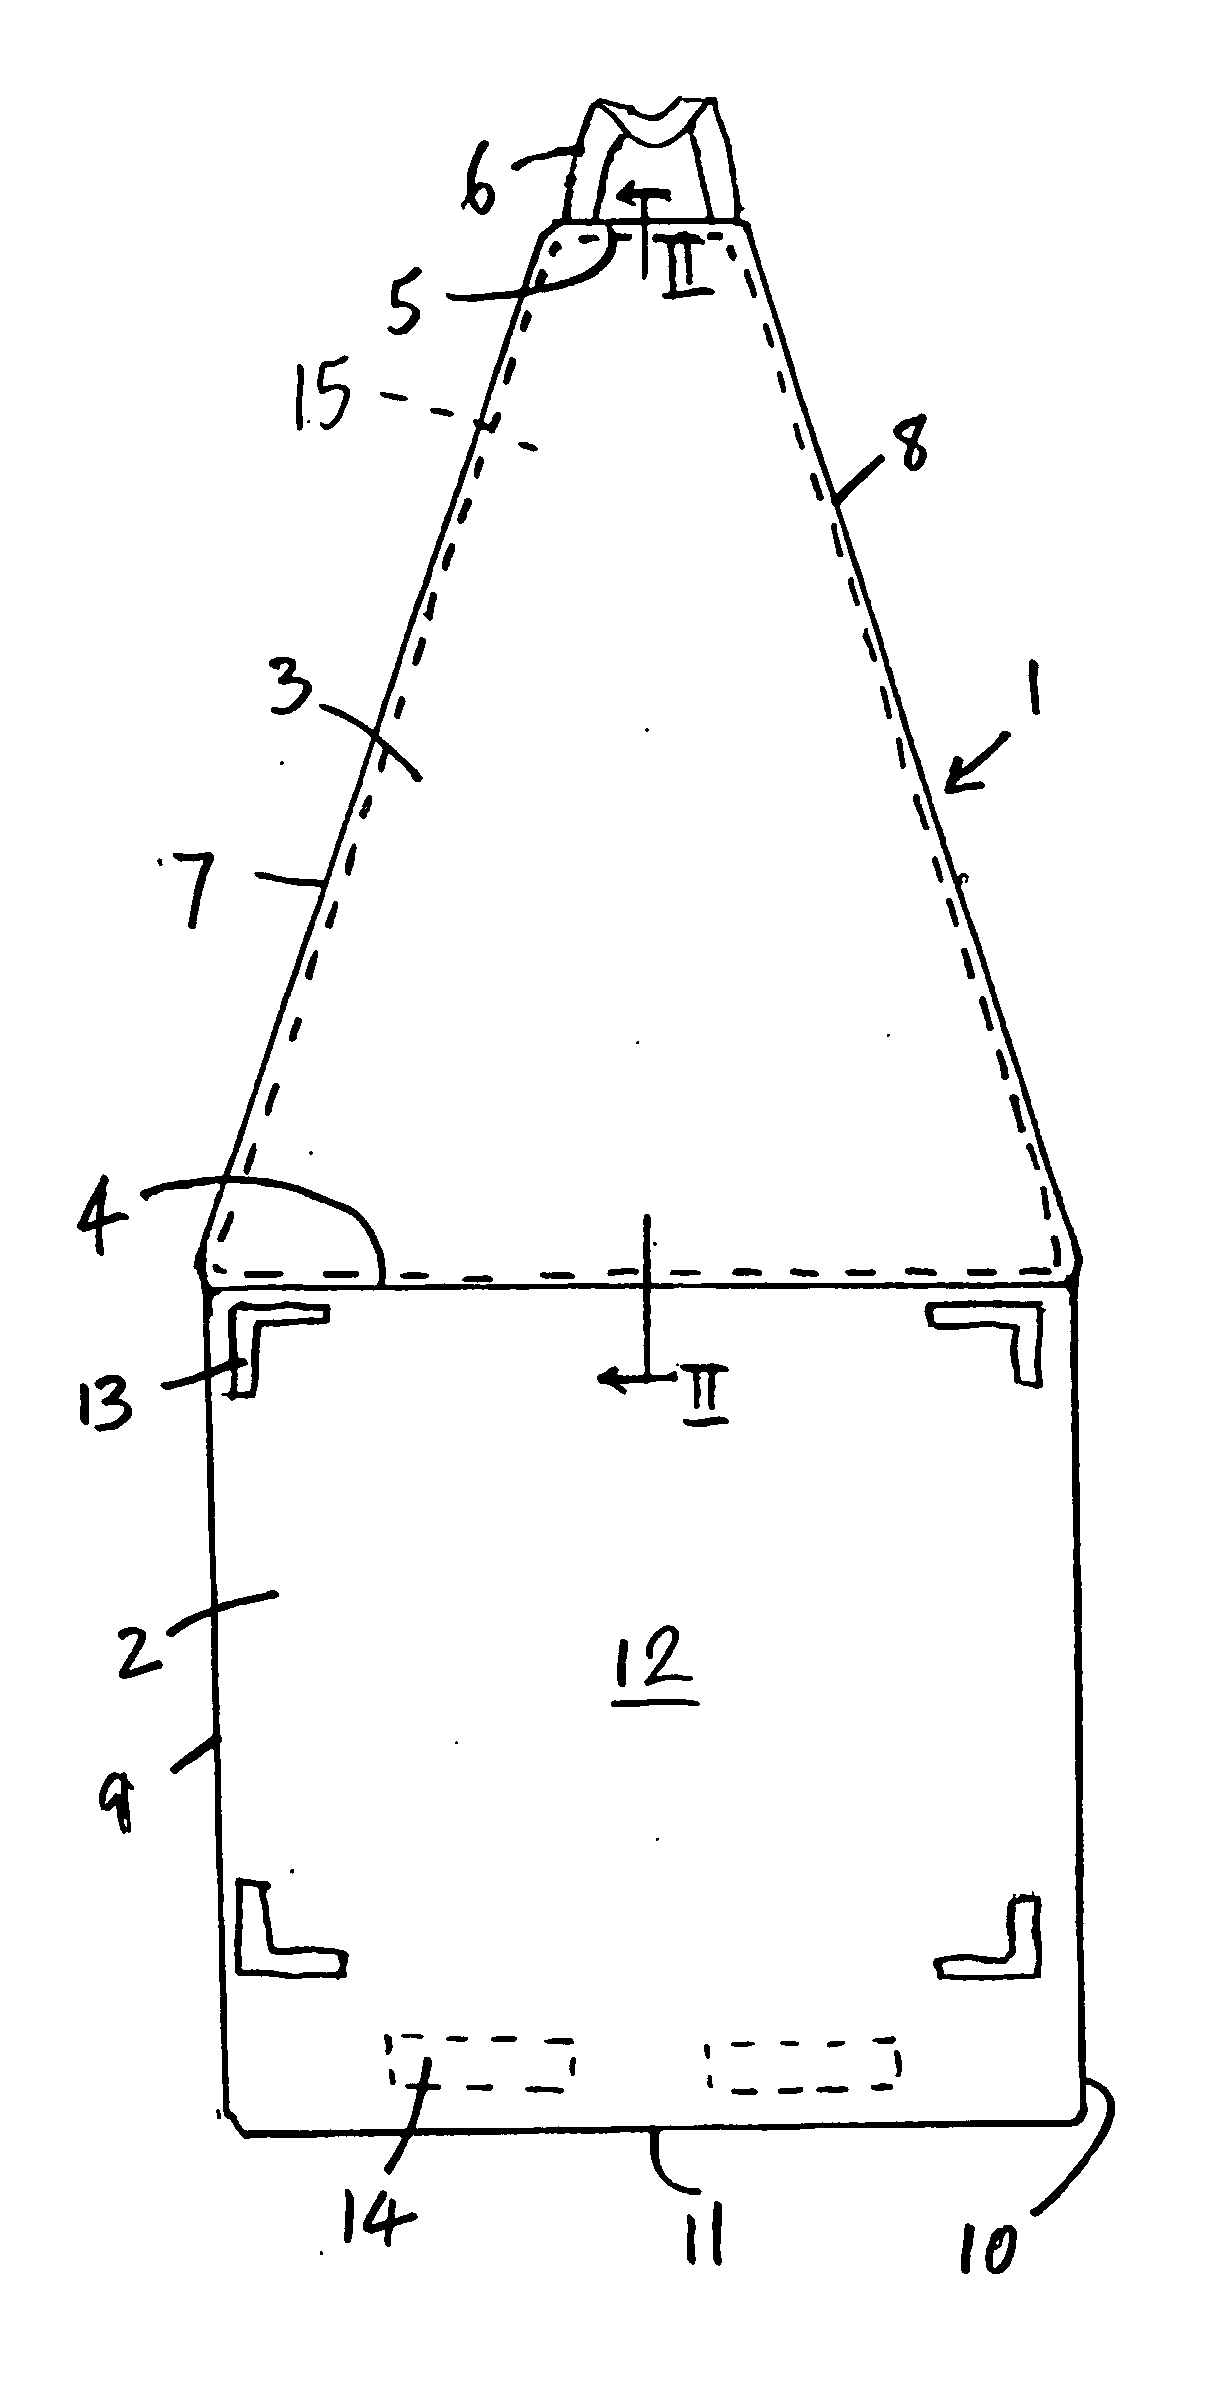 Positioning device for use in radiography